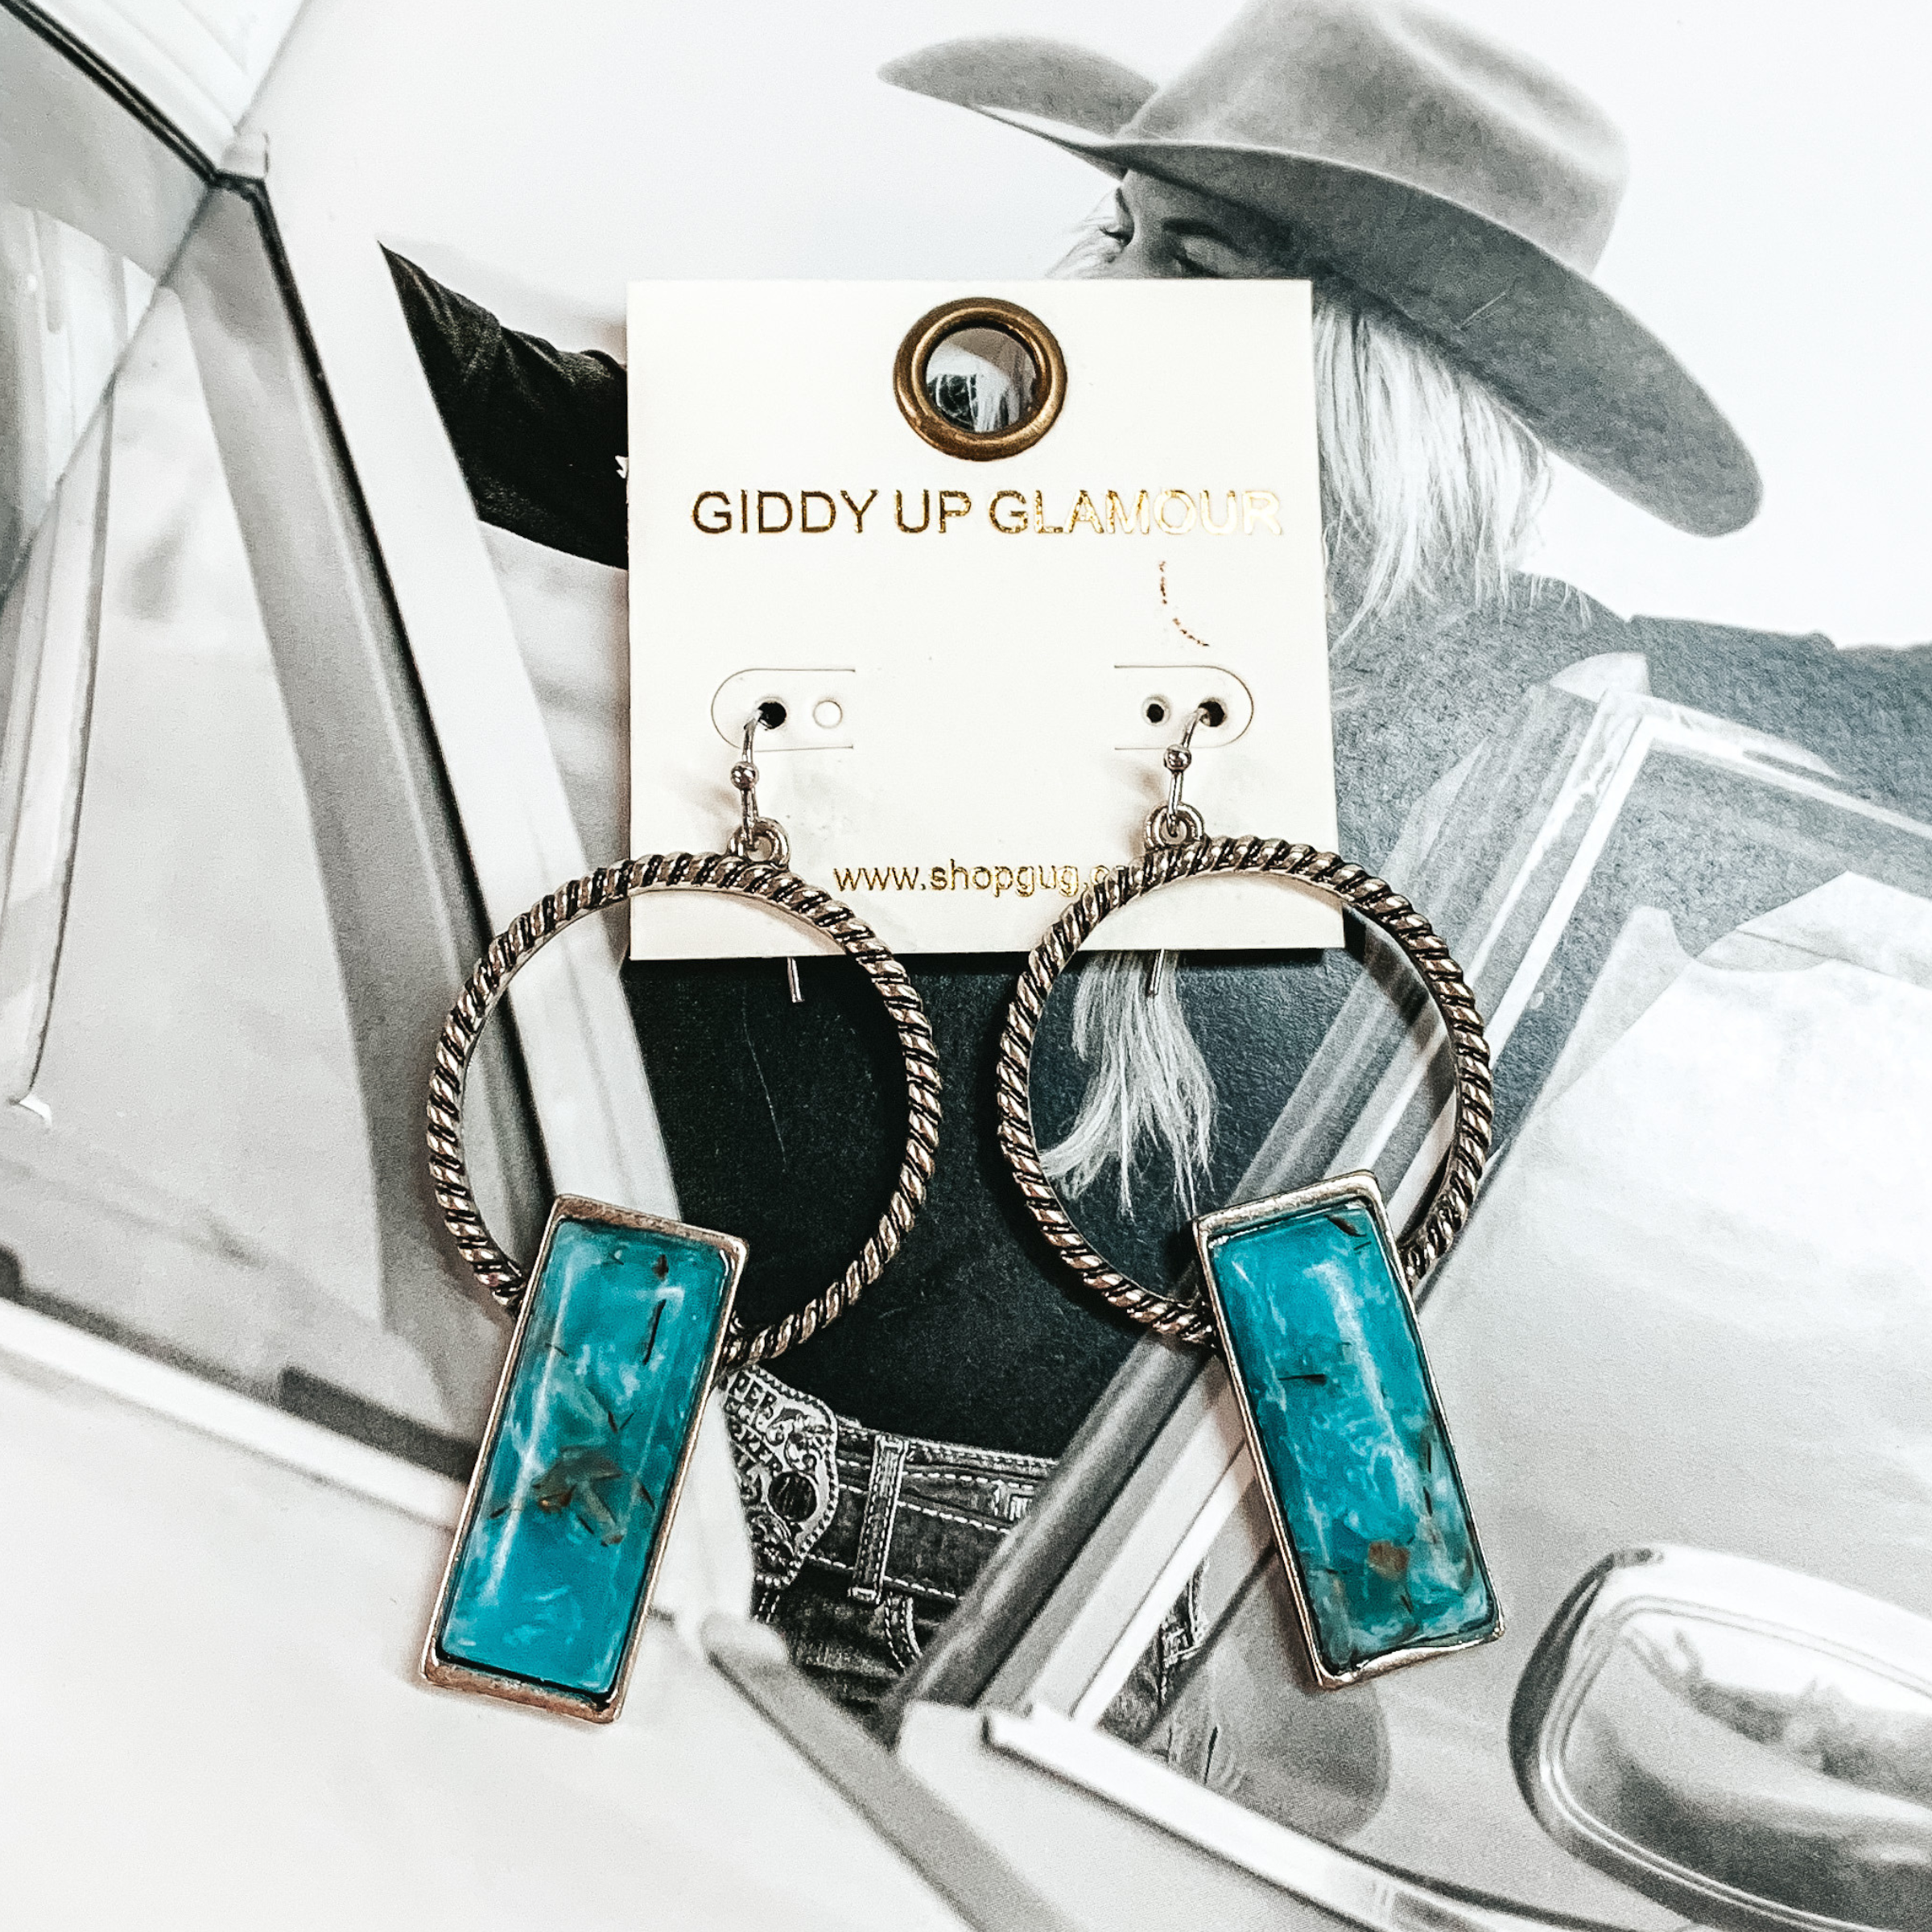 Silver hoop earrings with a rectangle faux turquoise stones. These earrings are pictured on a white and black picture. 